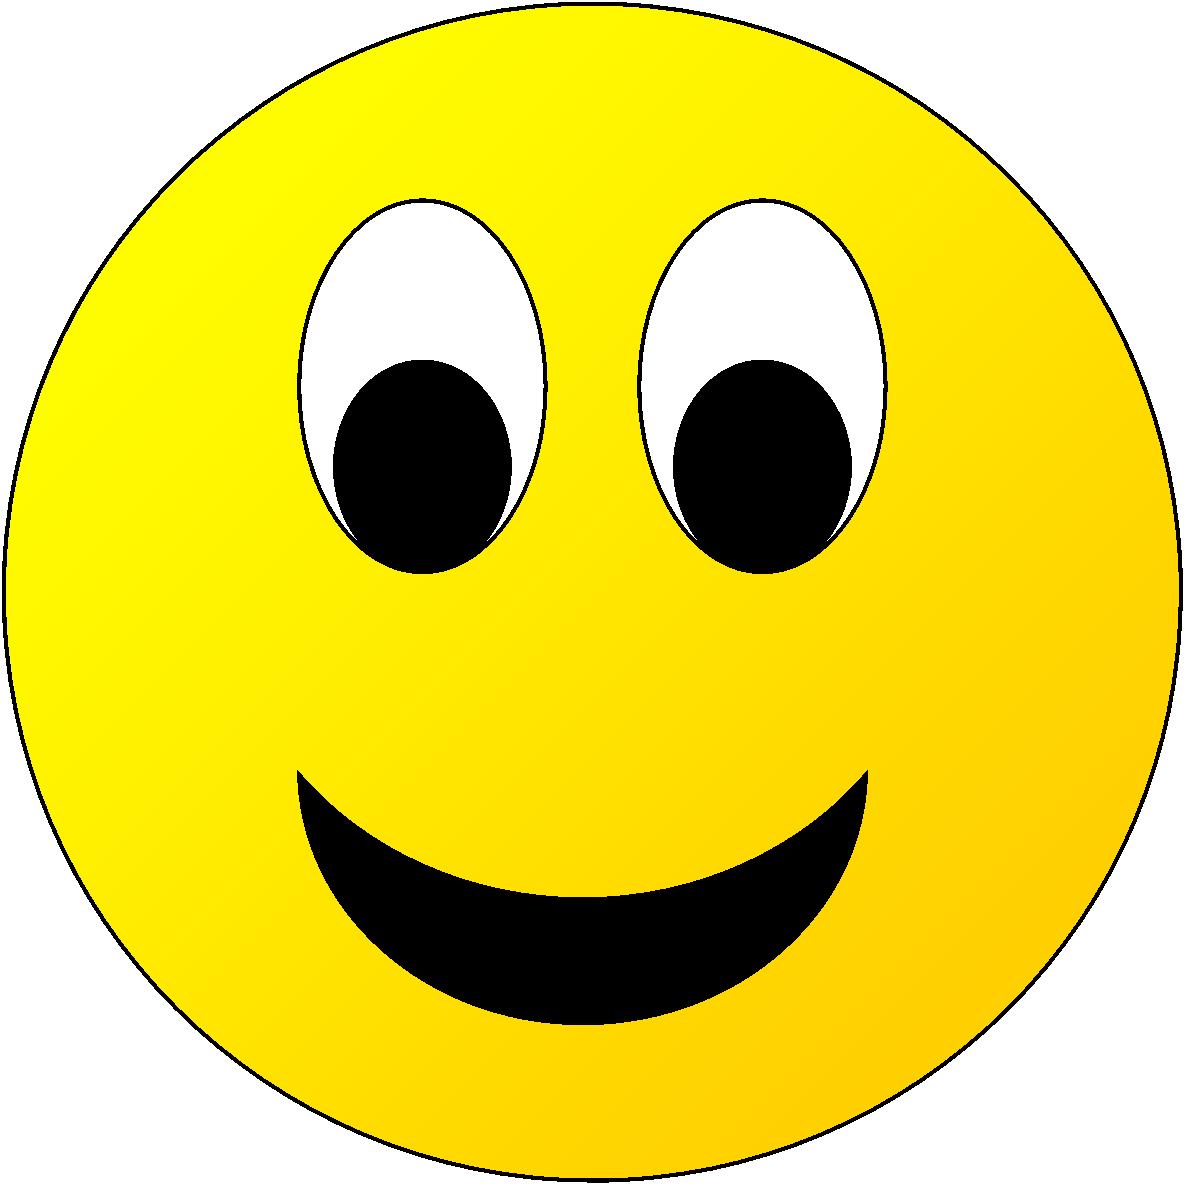 Animated Laughing Smiley Face - ClipArt Best